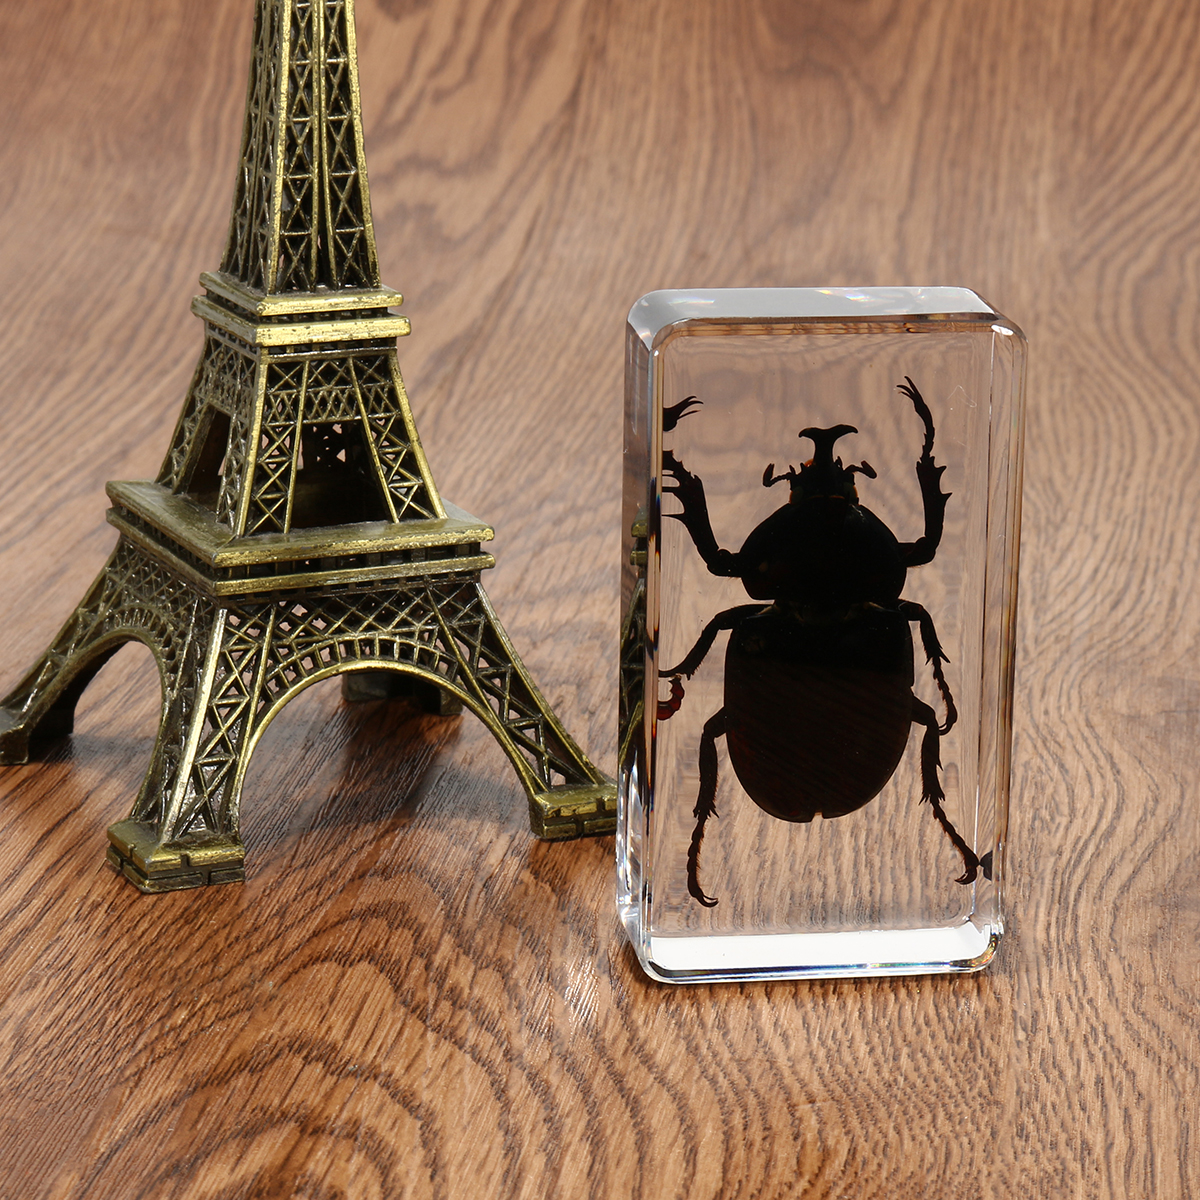 Clear-Acrylic-Lucite-Insect-Specimen-Spider-Black-Longhorn-Beetle-Scorpions-Craft-Science-Toy-1328098-7